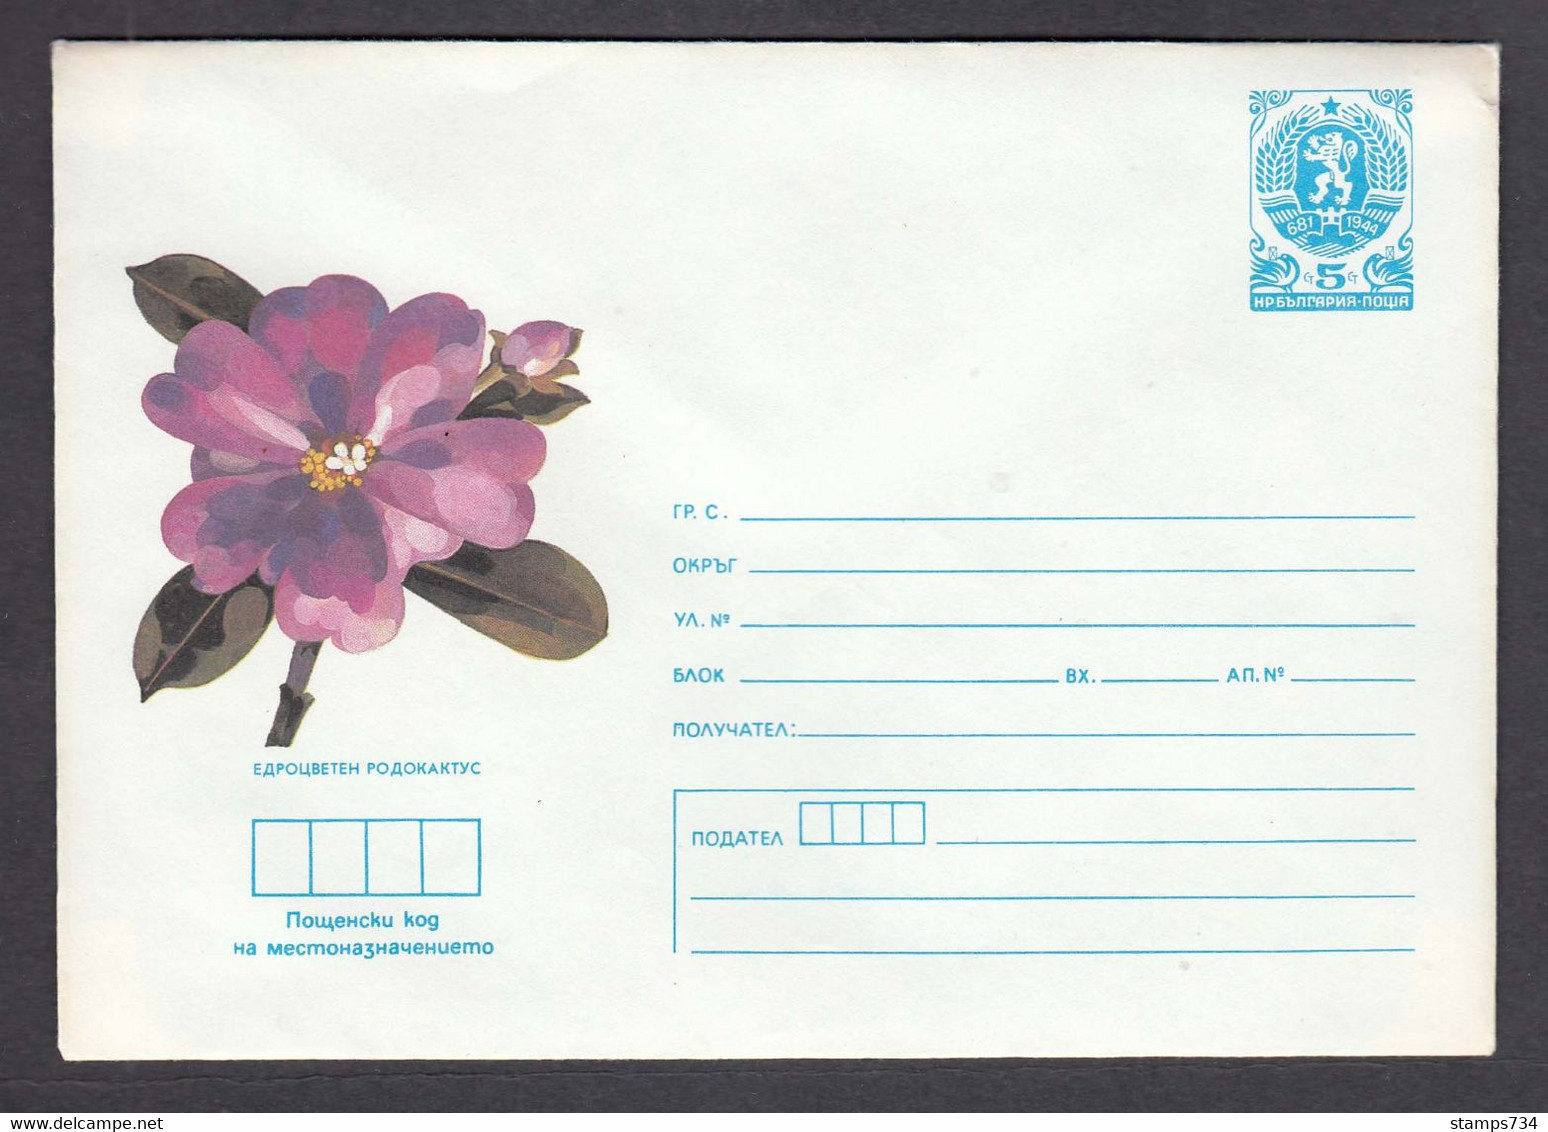 PS 887/1987 - Mint, Flower: Large-flowered Rhodocactus, Post. Stationery - Bulgaria - Covers